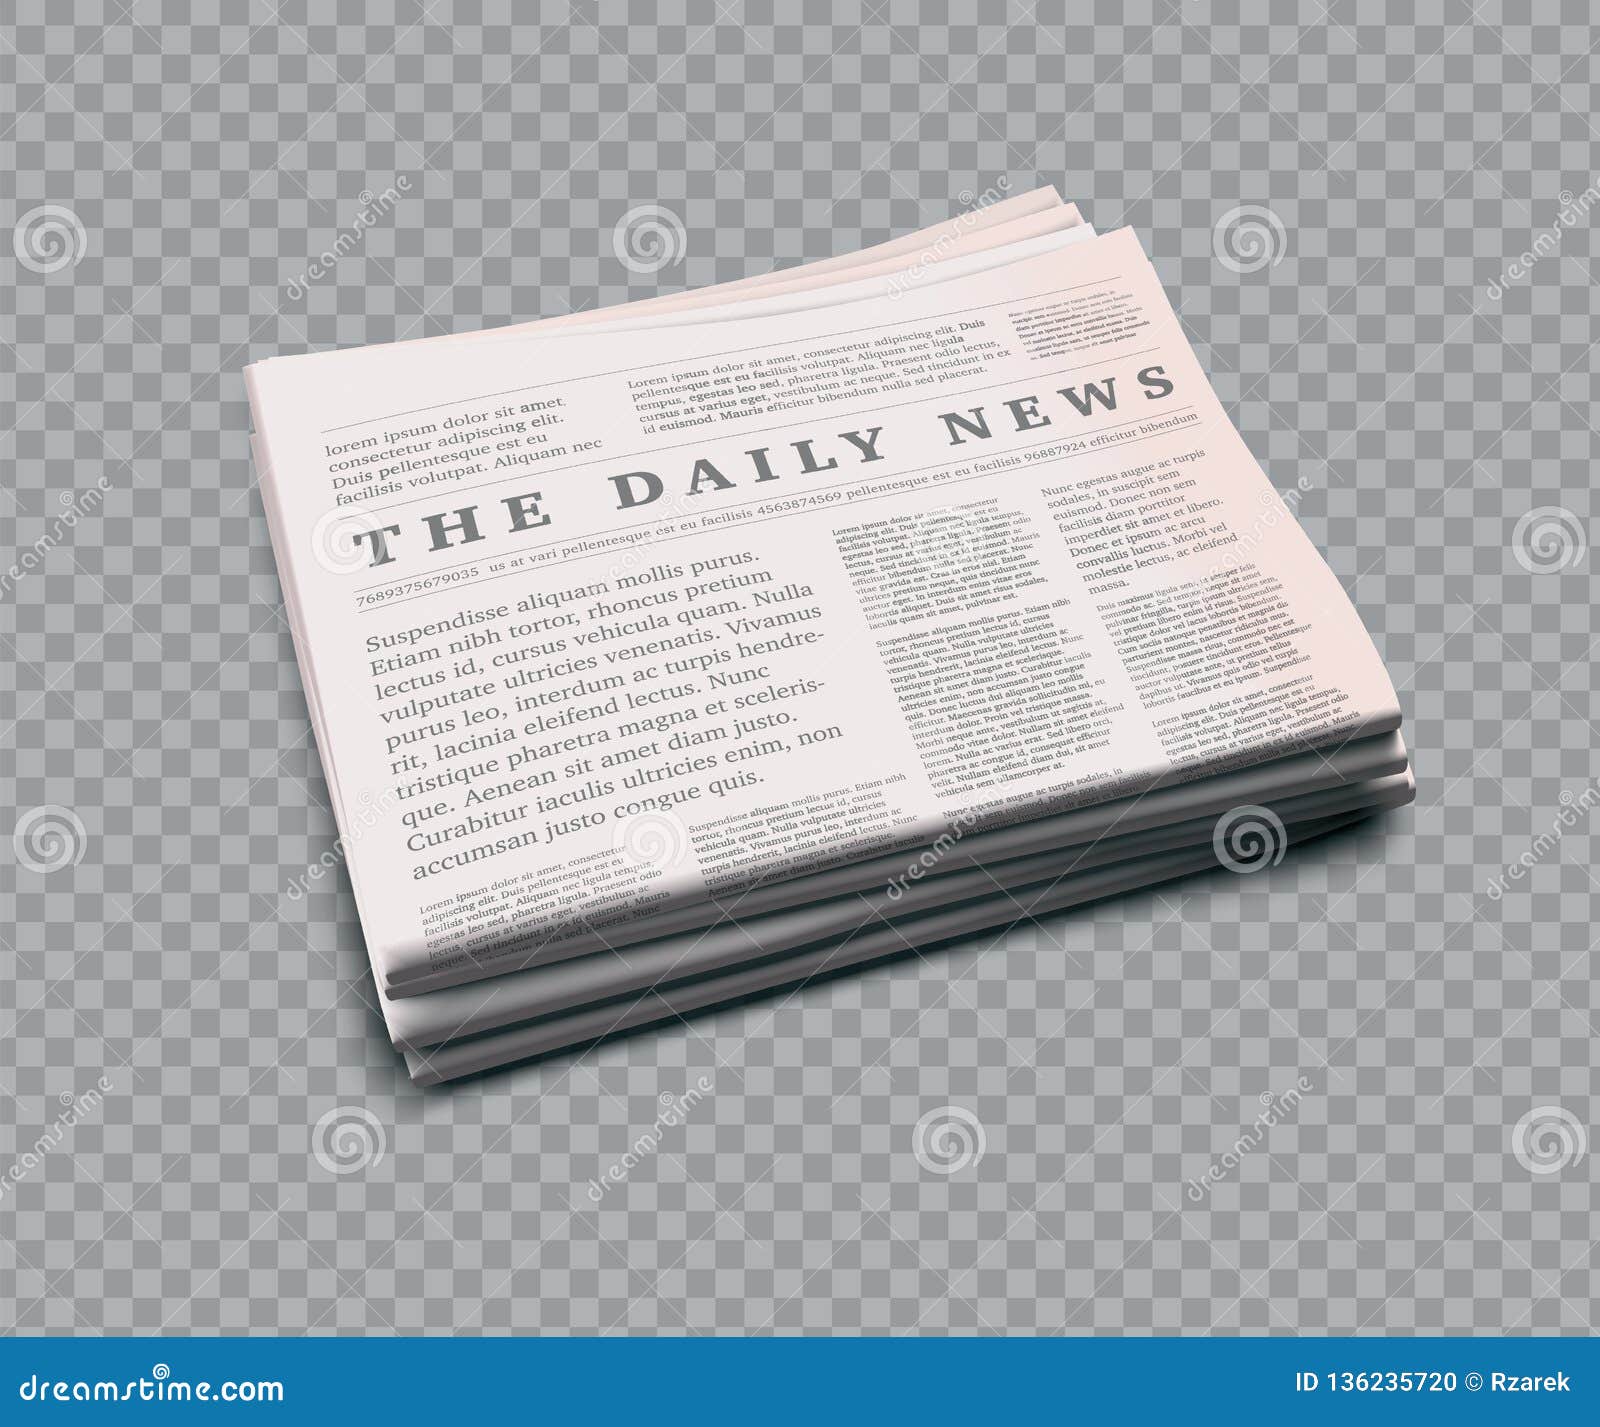 Vector Realistic Newspaper With Empty Space To Add Your Own Text And Pictures On Transparent Background Vector Stock Vector Illustration Of Journalism Press